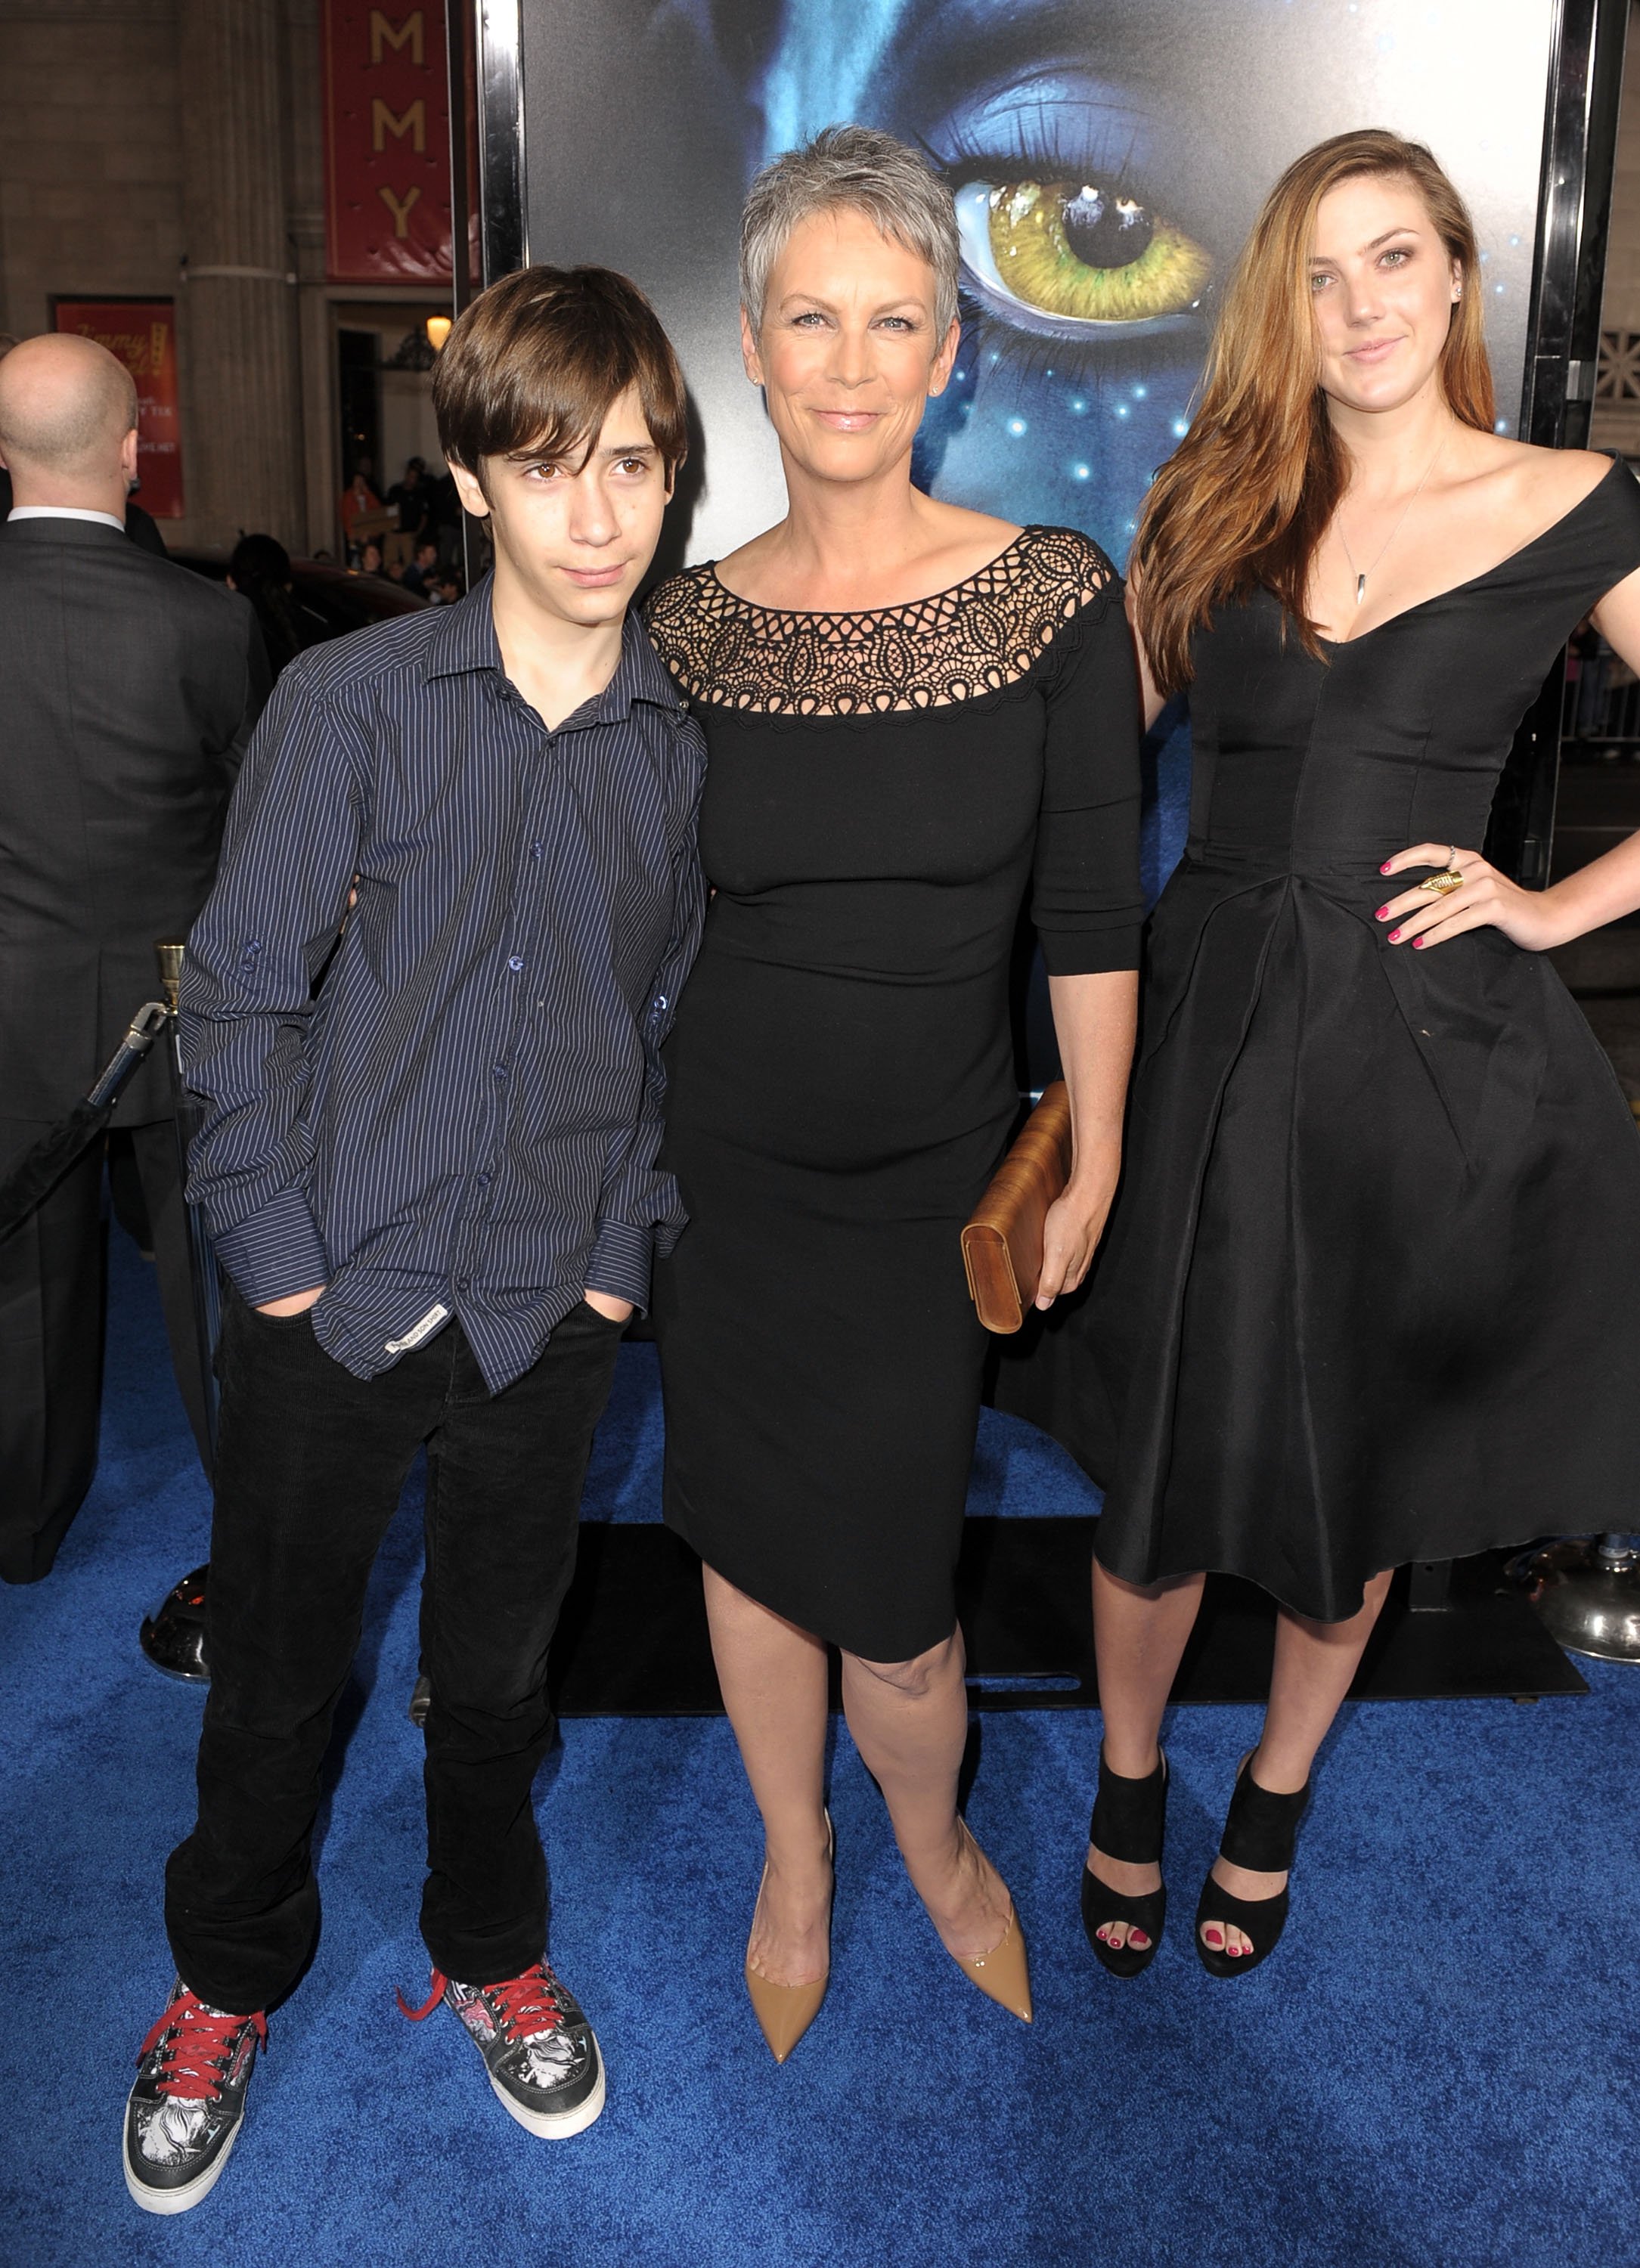 Jamie Lee Curtis with her daughter Annie and son Thomas at the premiere of "Avatar" in Hollywood, California on December 16, 2009 | Photo: Getty Images